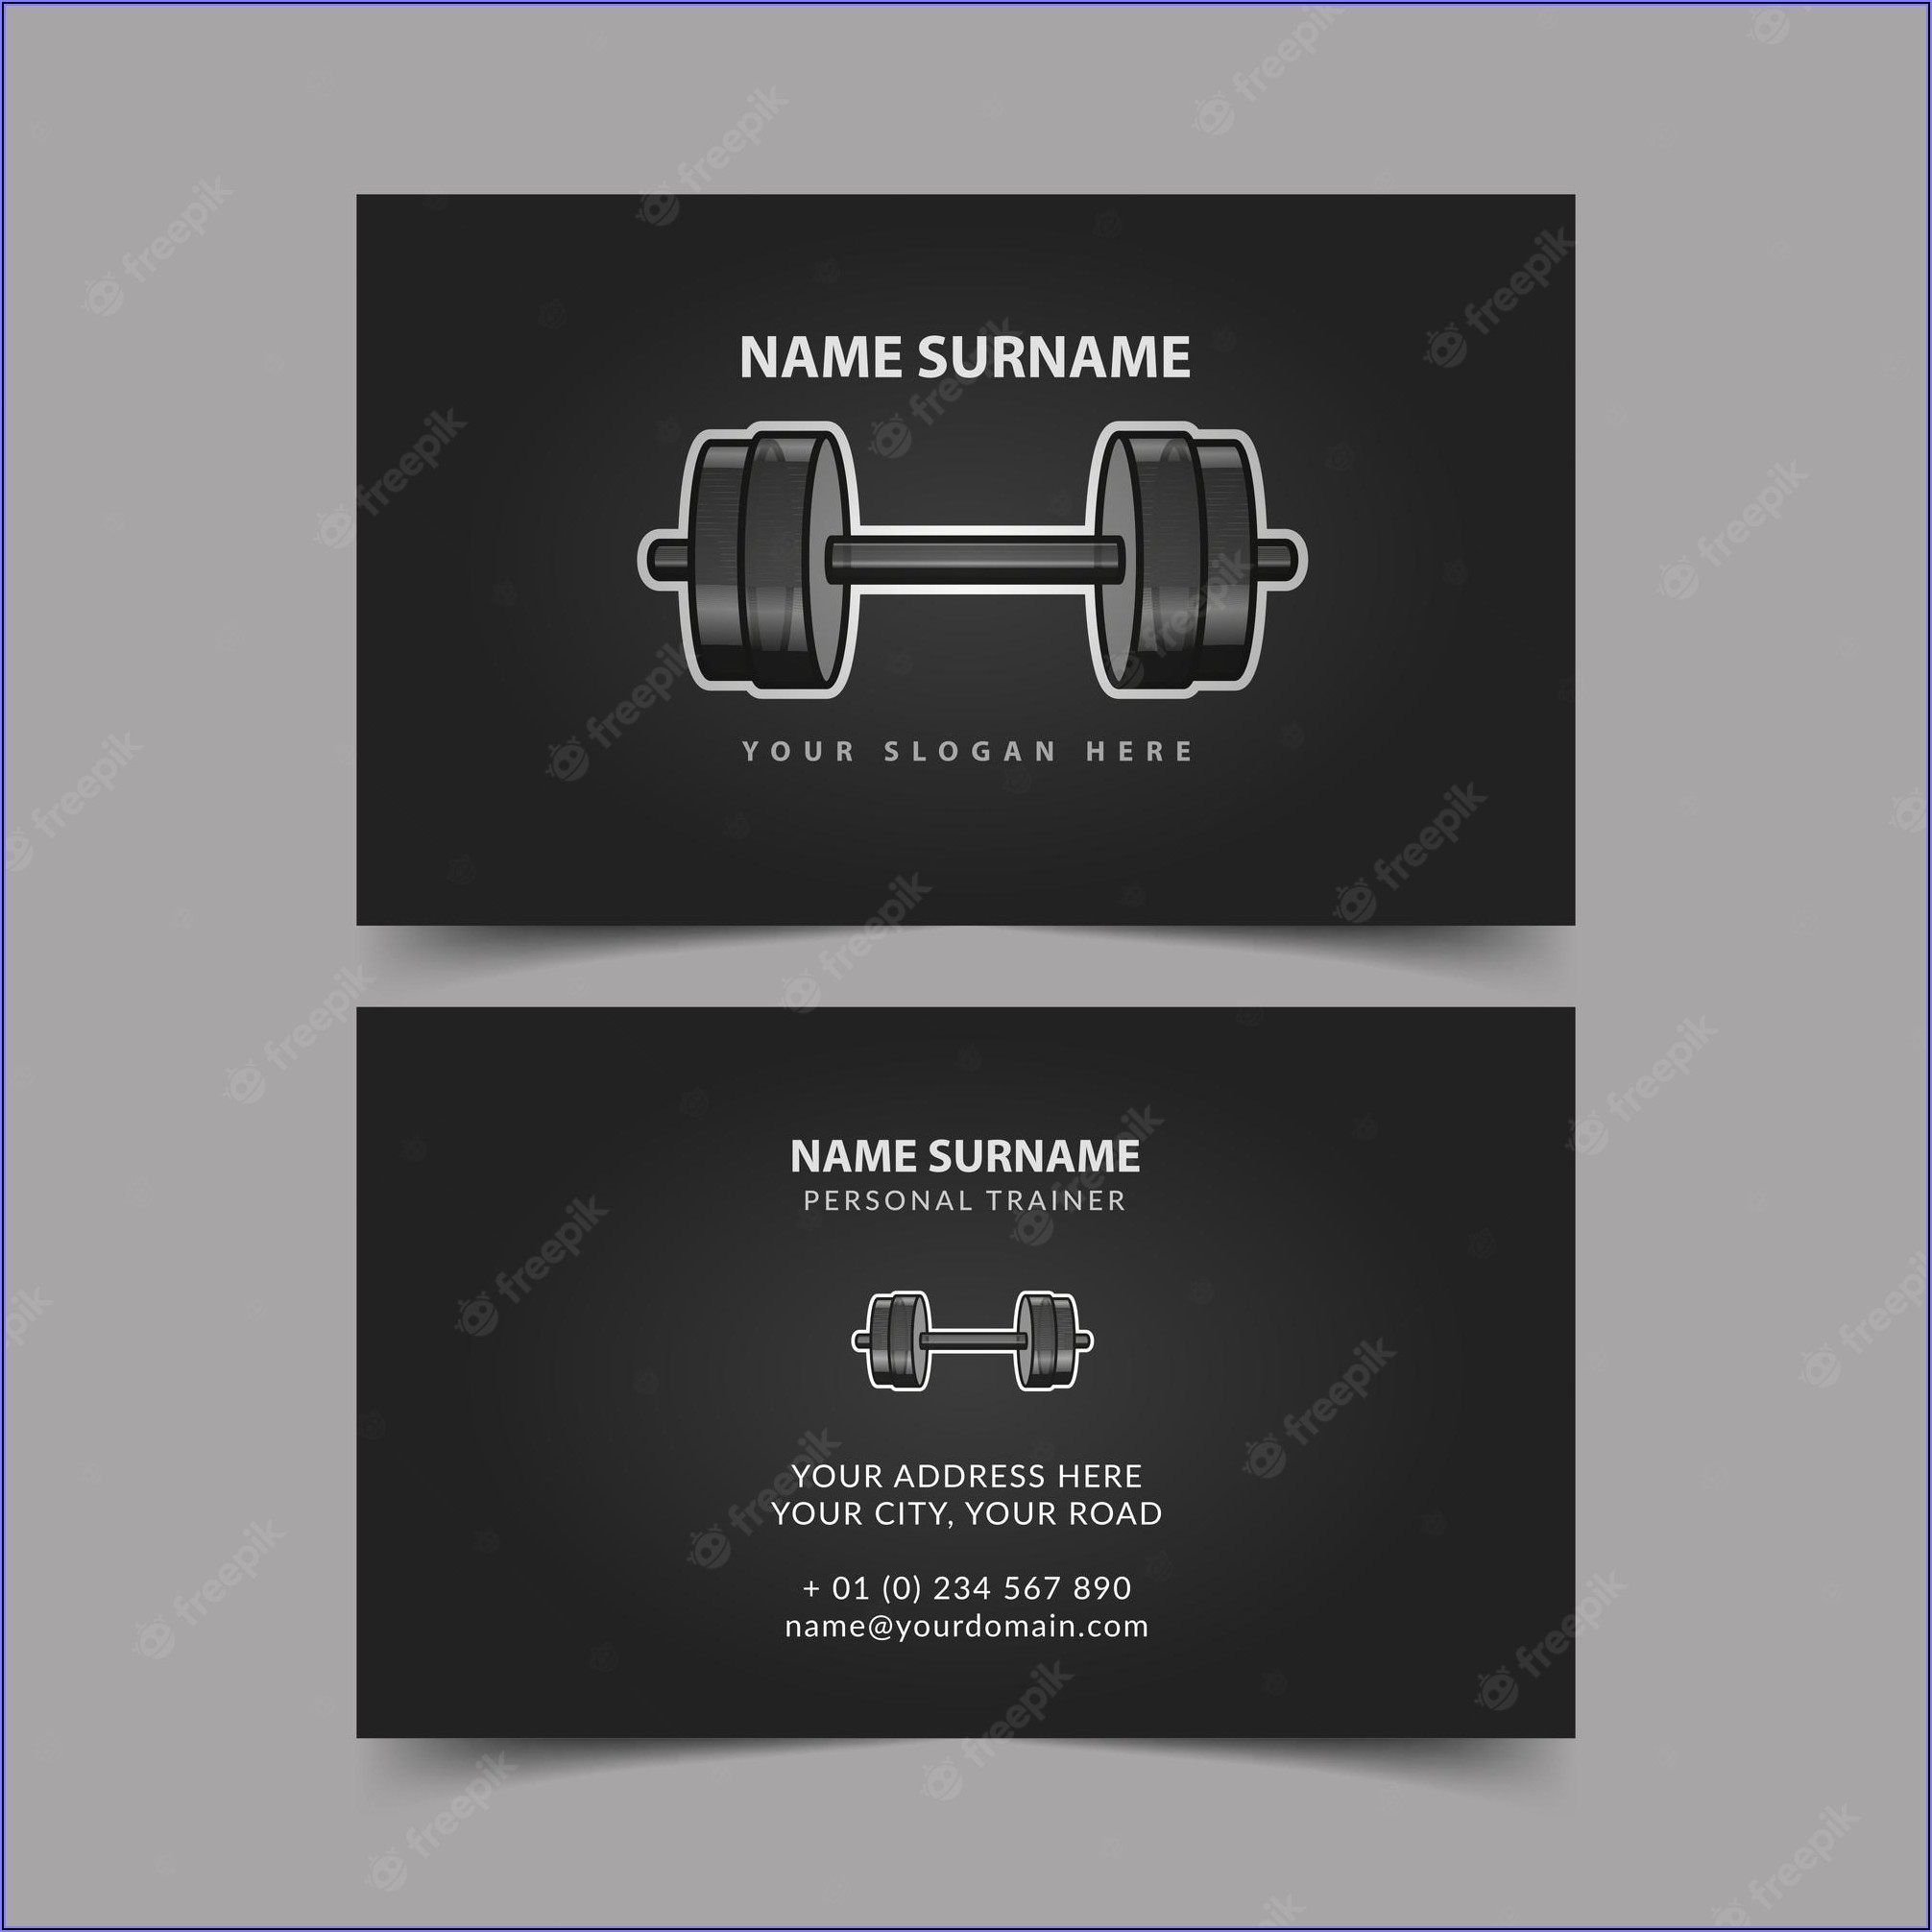 Personal Trainer Business Card Templates Free